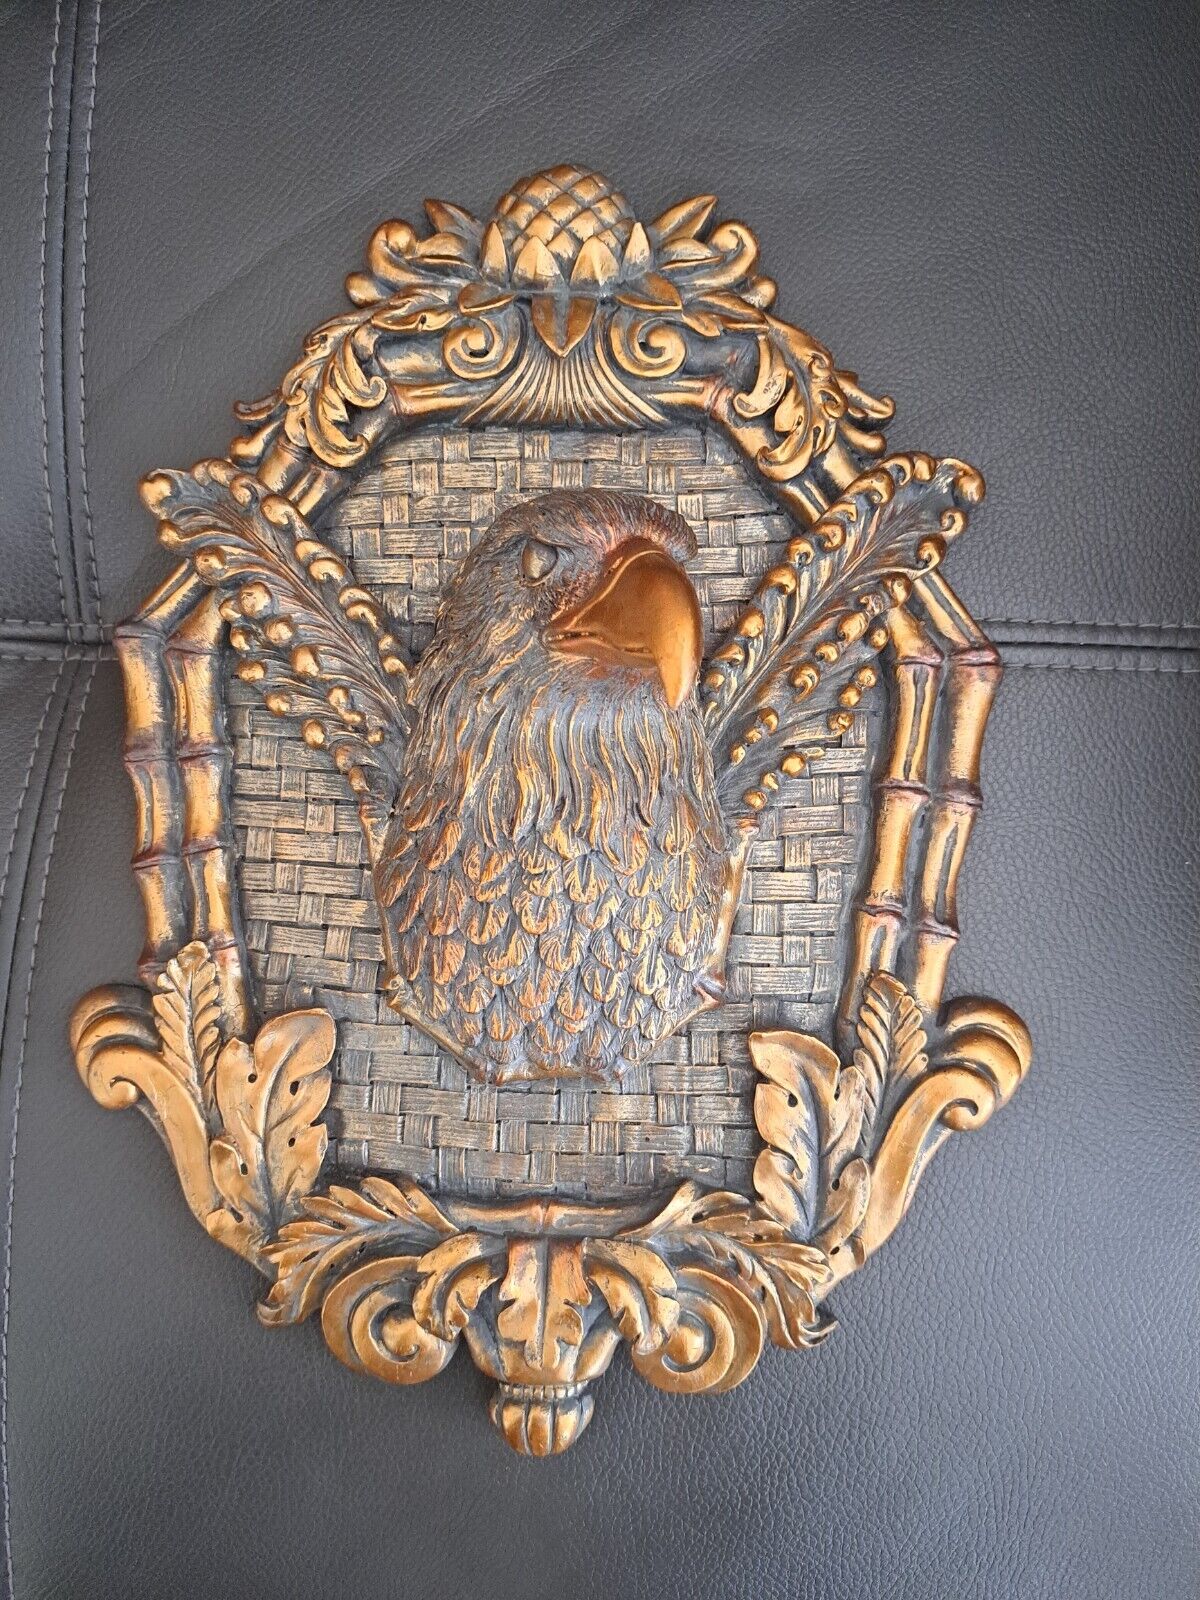 Stunning Gold Gilded Eagle Plaque